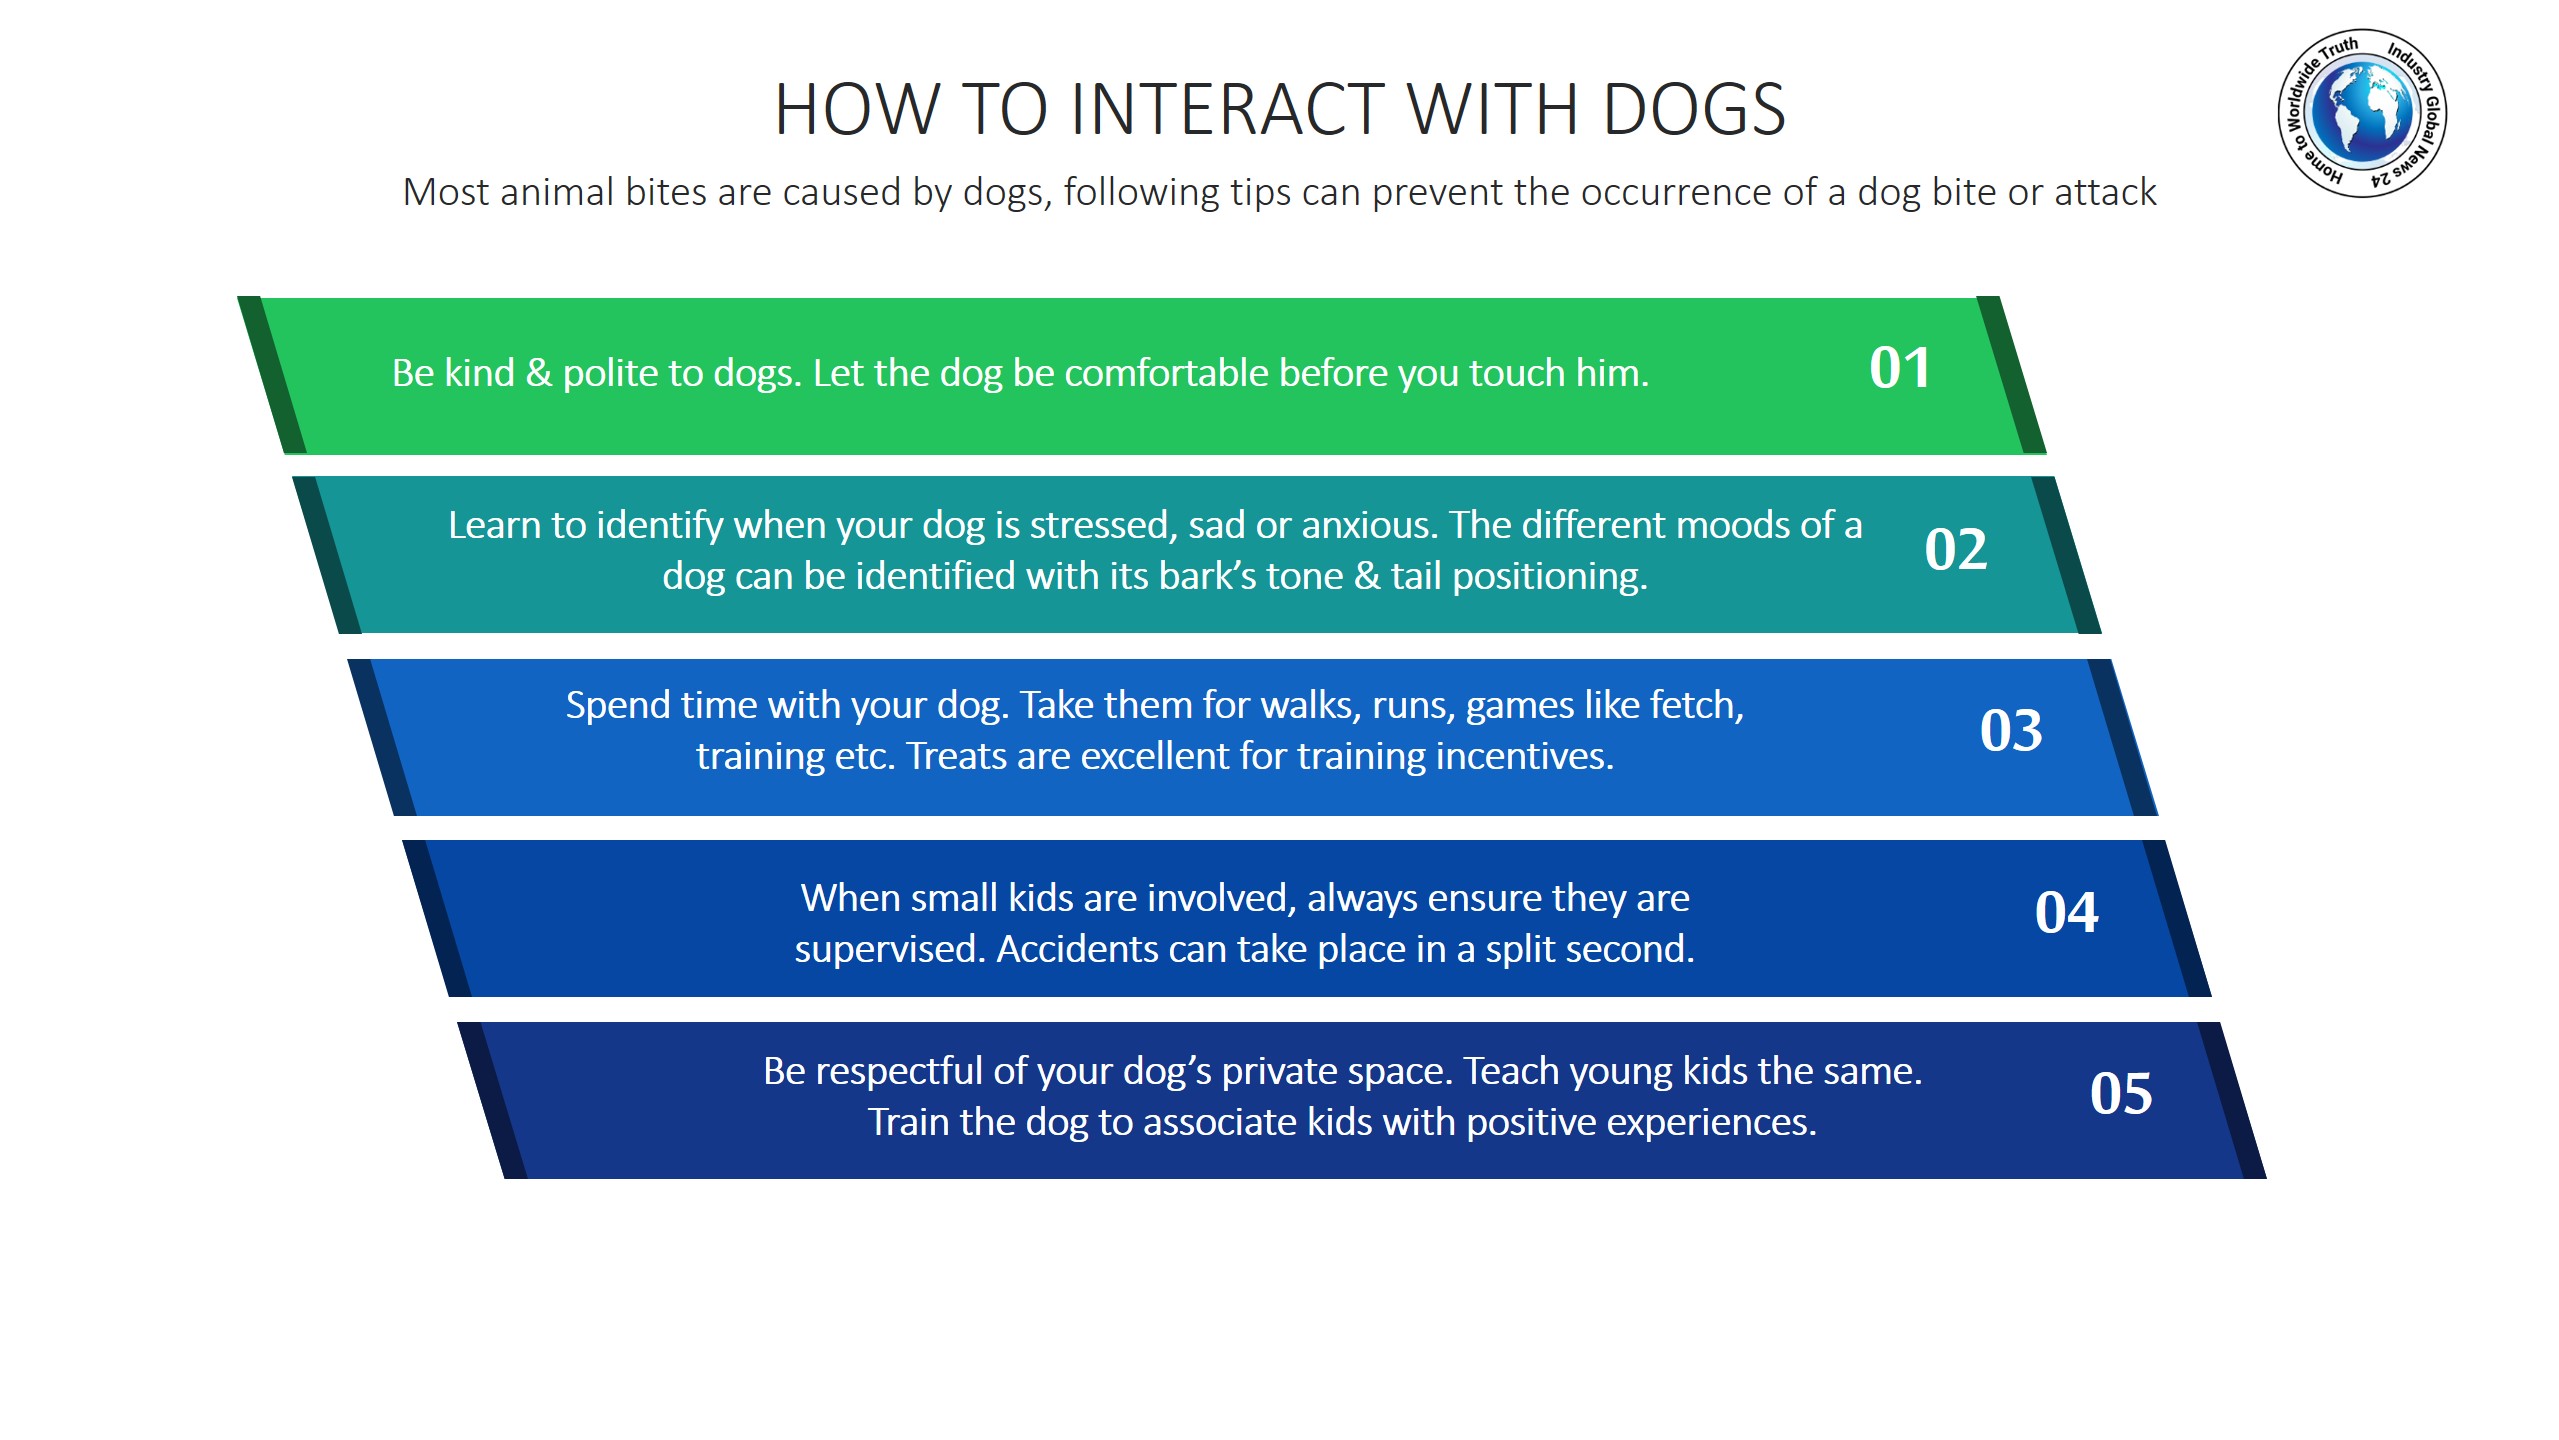 How to interact with dogs